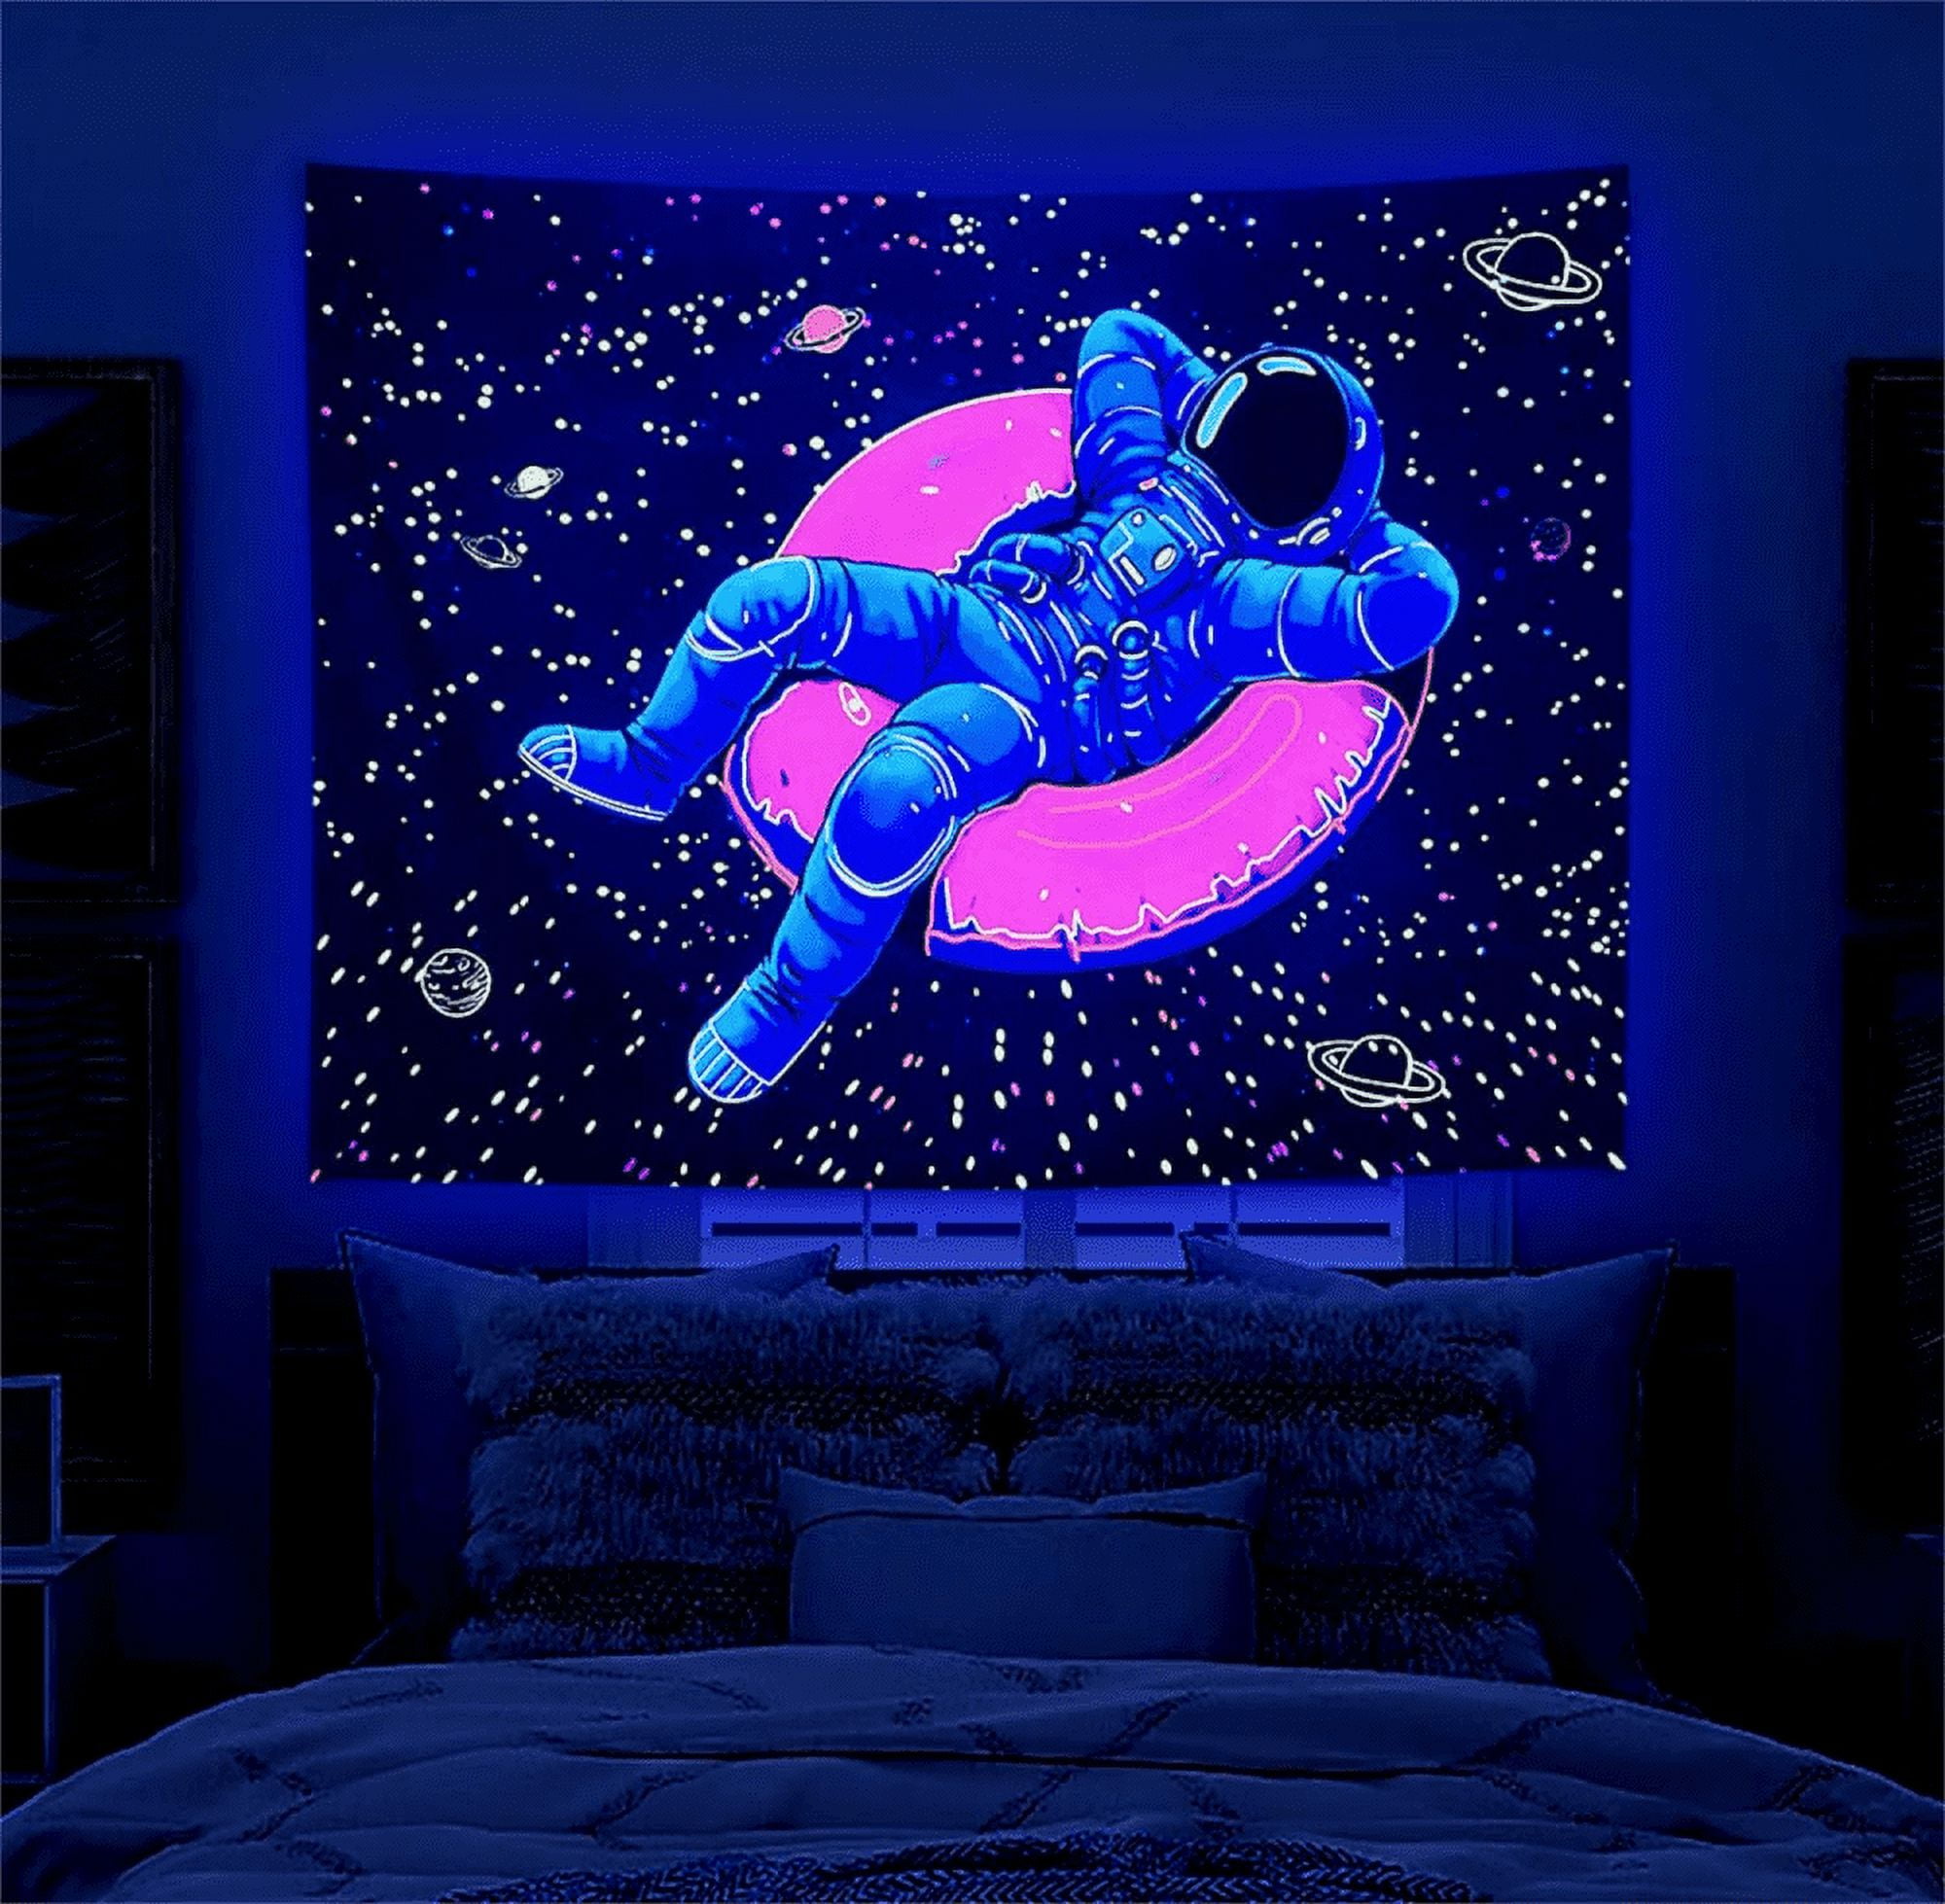 Blacklight Space Astronaut Tapestry for Men Guys Bedroom Galaxy Planet Cool  Posters Fantasy Decor Funny UV Reactive Art Wall Hanging for Living Room  Dorm Decorations (40×60) 